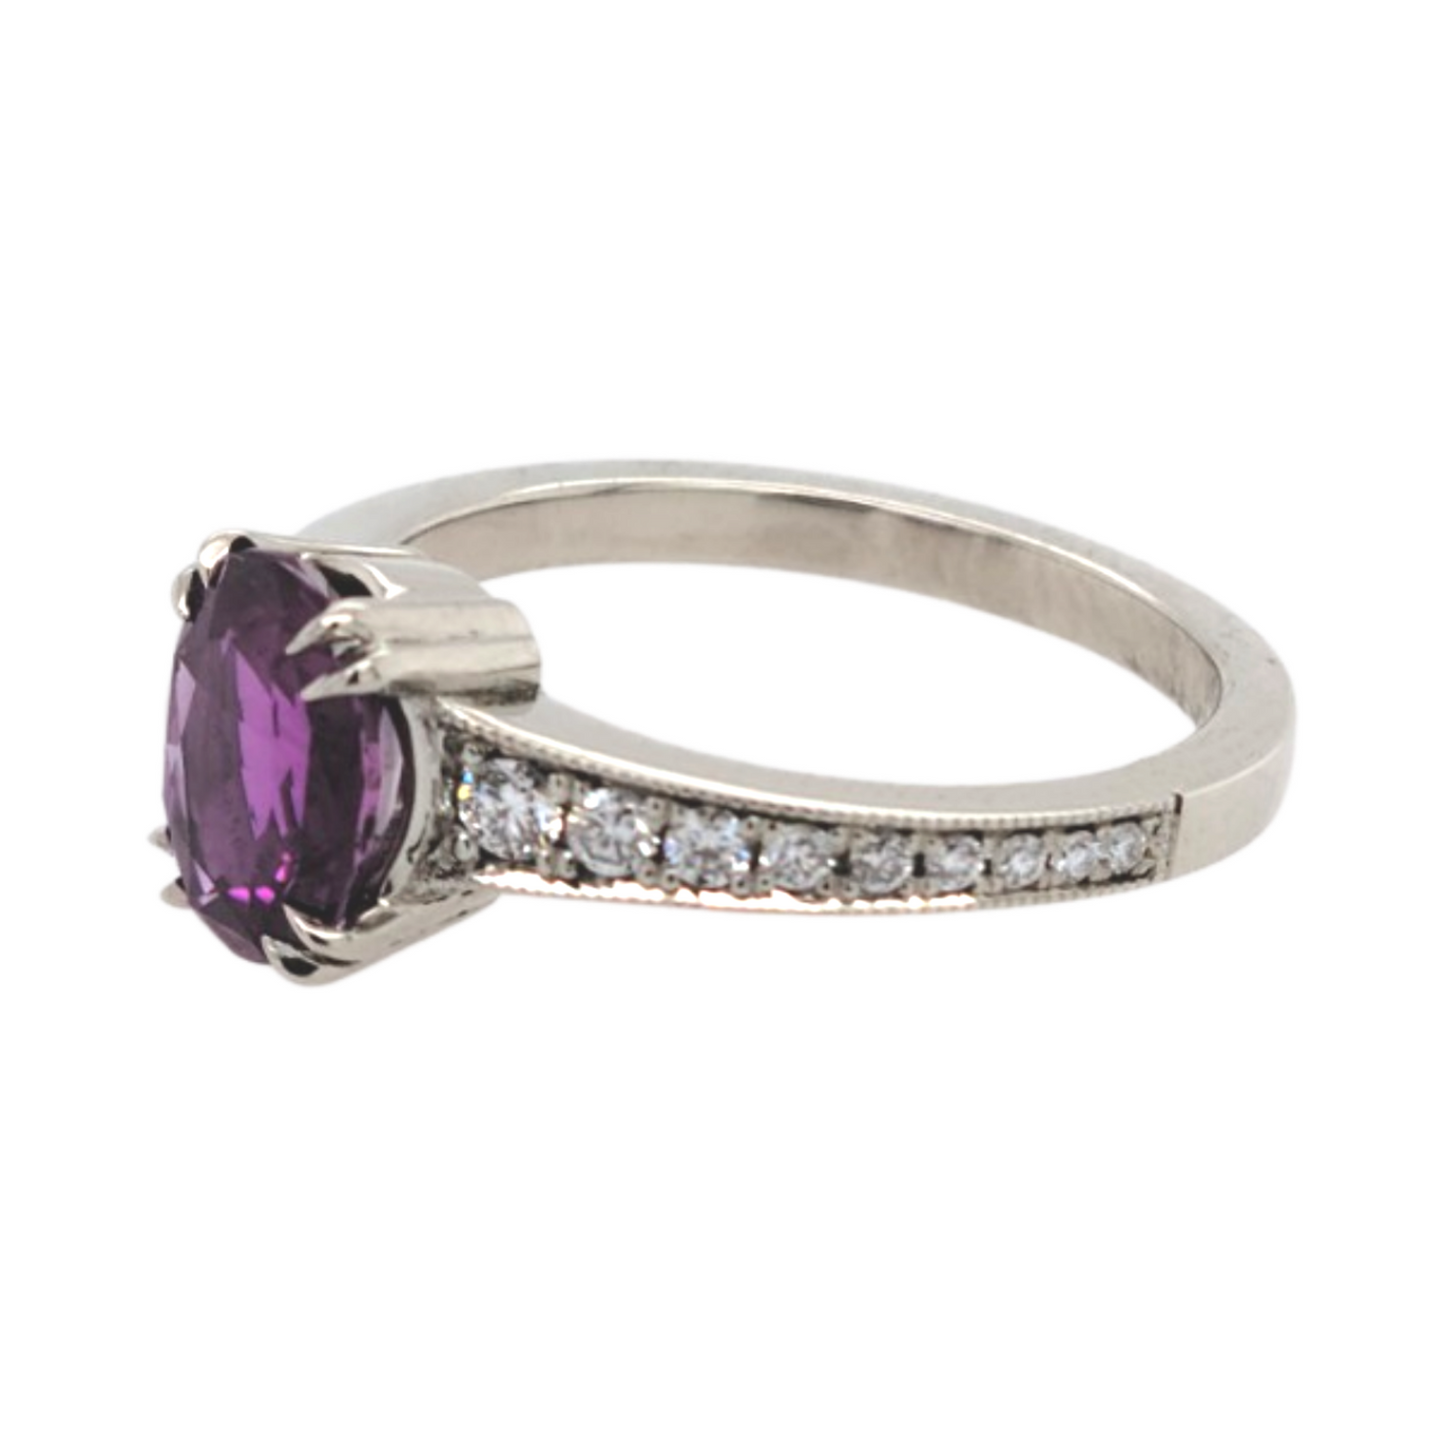 Oval Pink Sapphire Ring